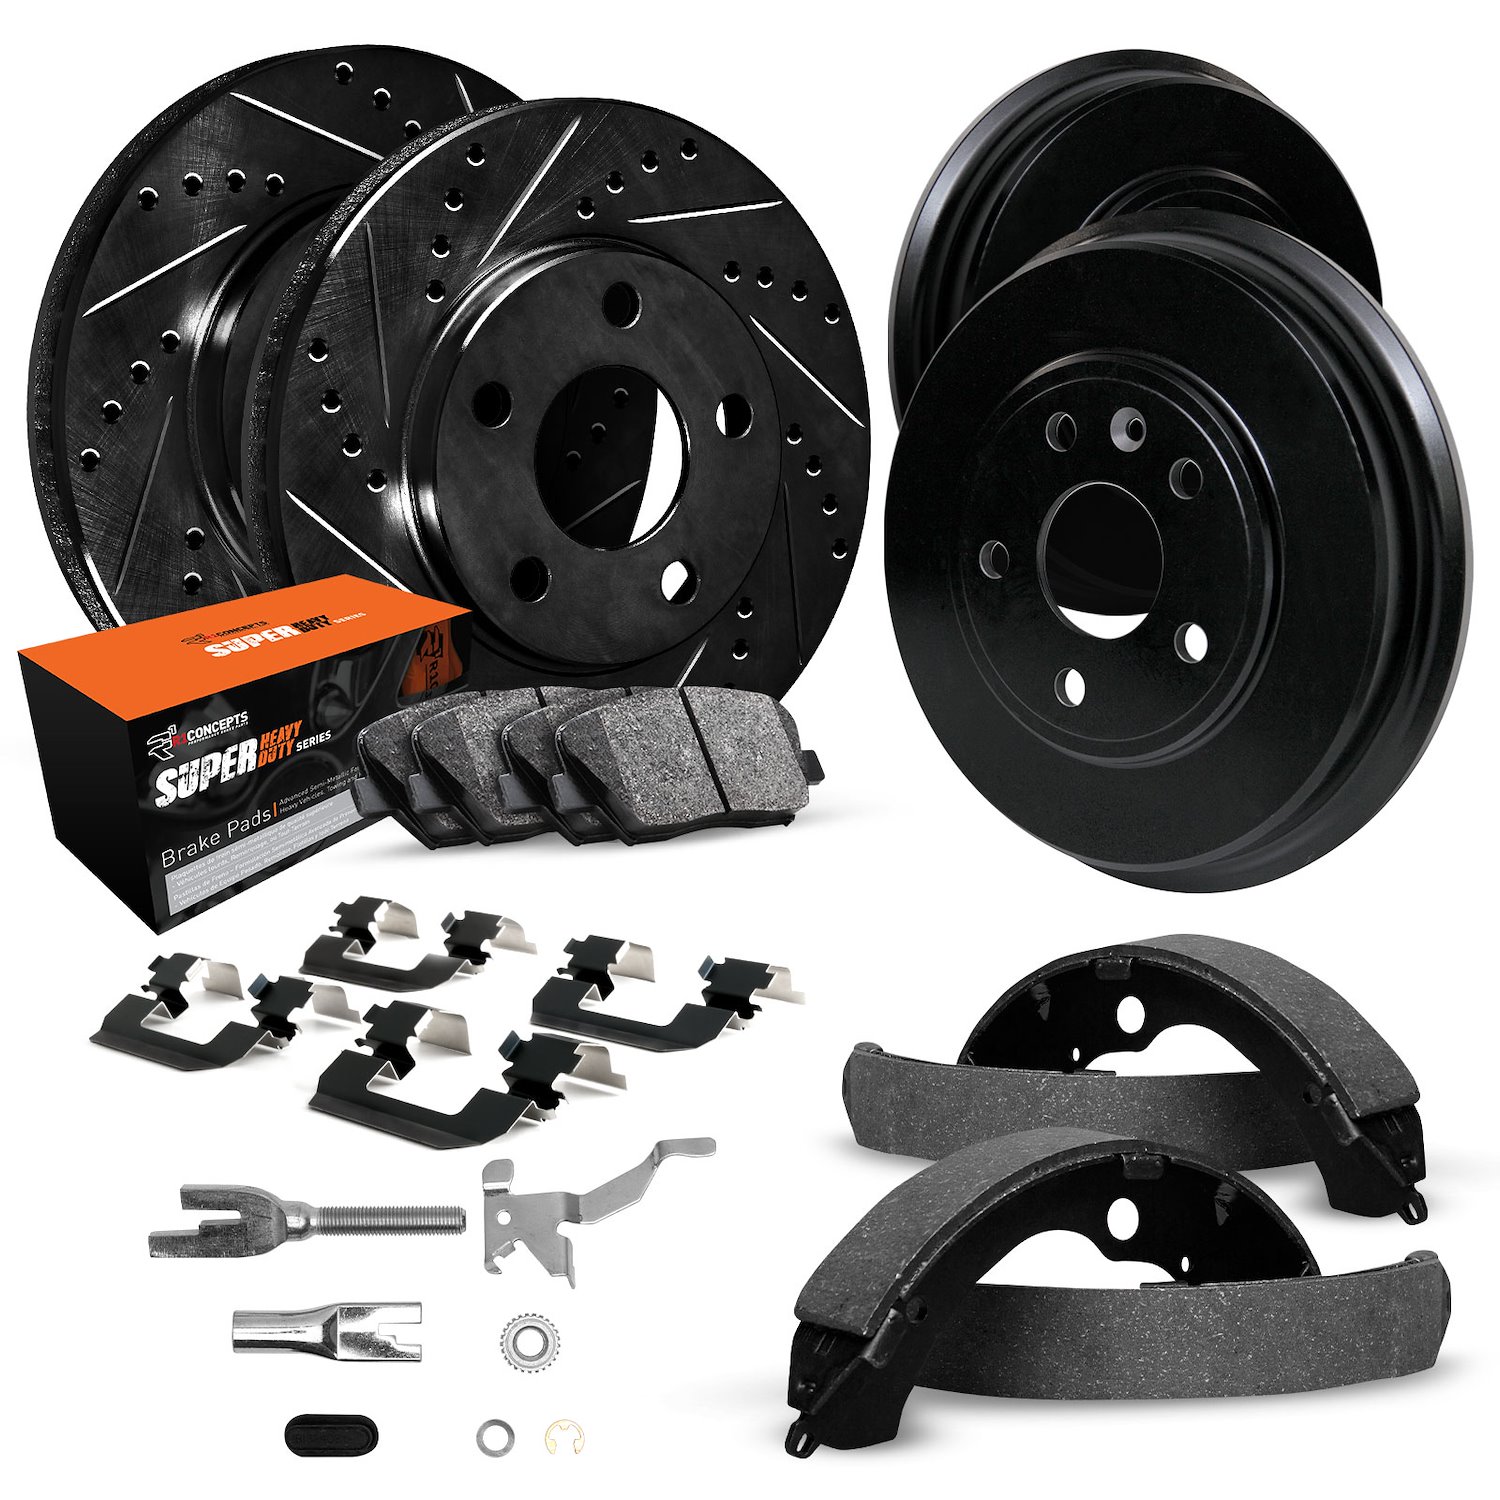 E-Line Drilled/Slotted Black Rotor & Drum Set w/Super-Duty Pads, Shoes, Hardware/Adjusters, 1980-1980 Ford/Lincoln/Mercury/Mazda